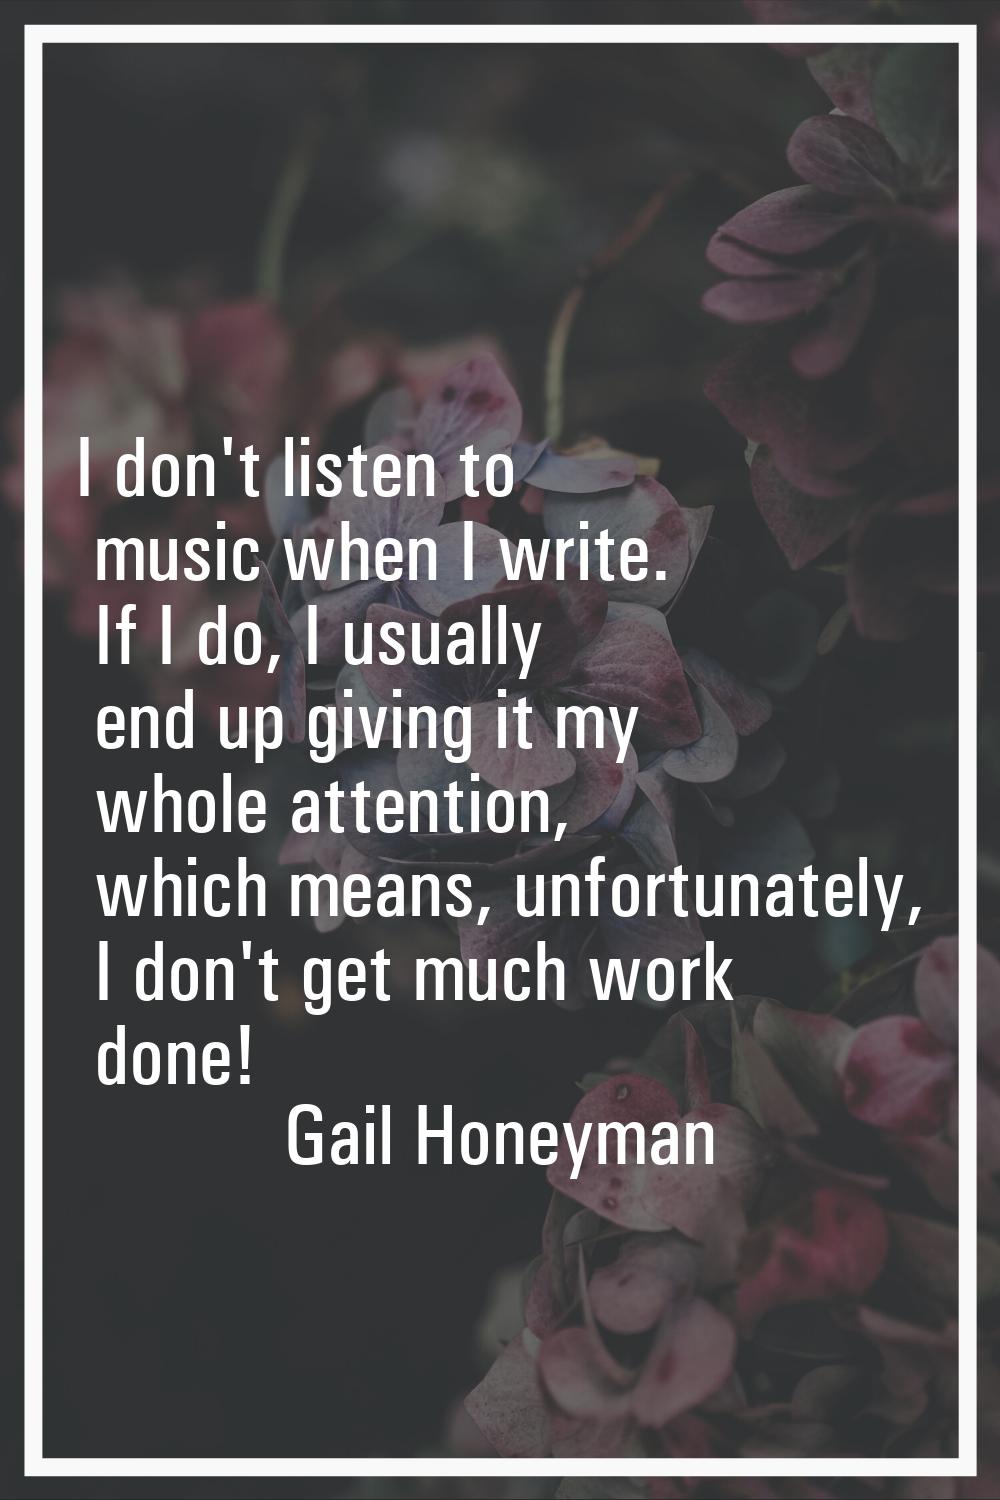 I don't listen to music when I write. If I do, I usually end up giving it my whole attention, which